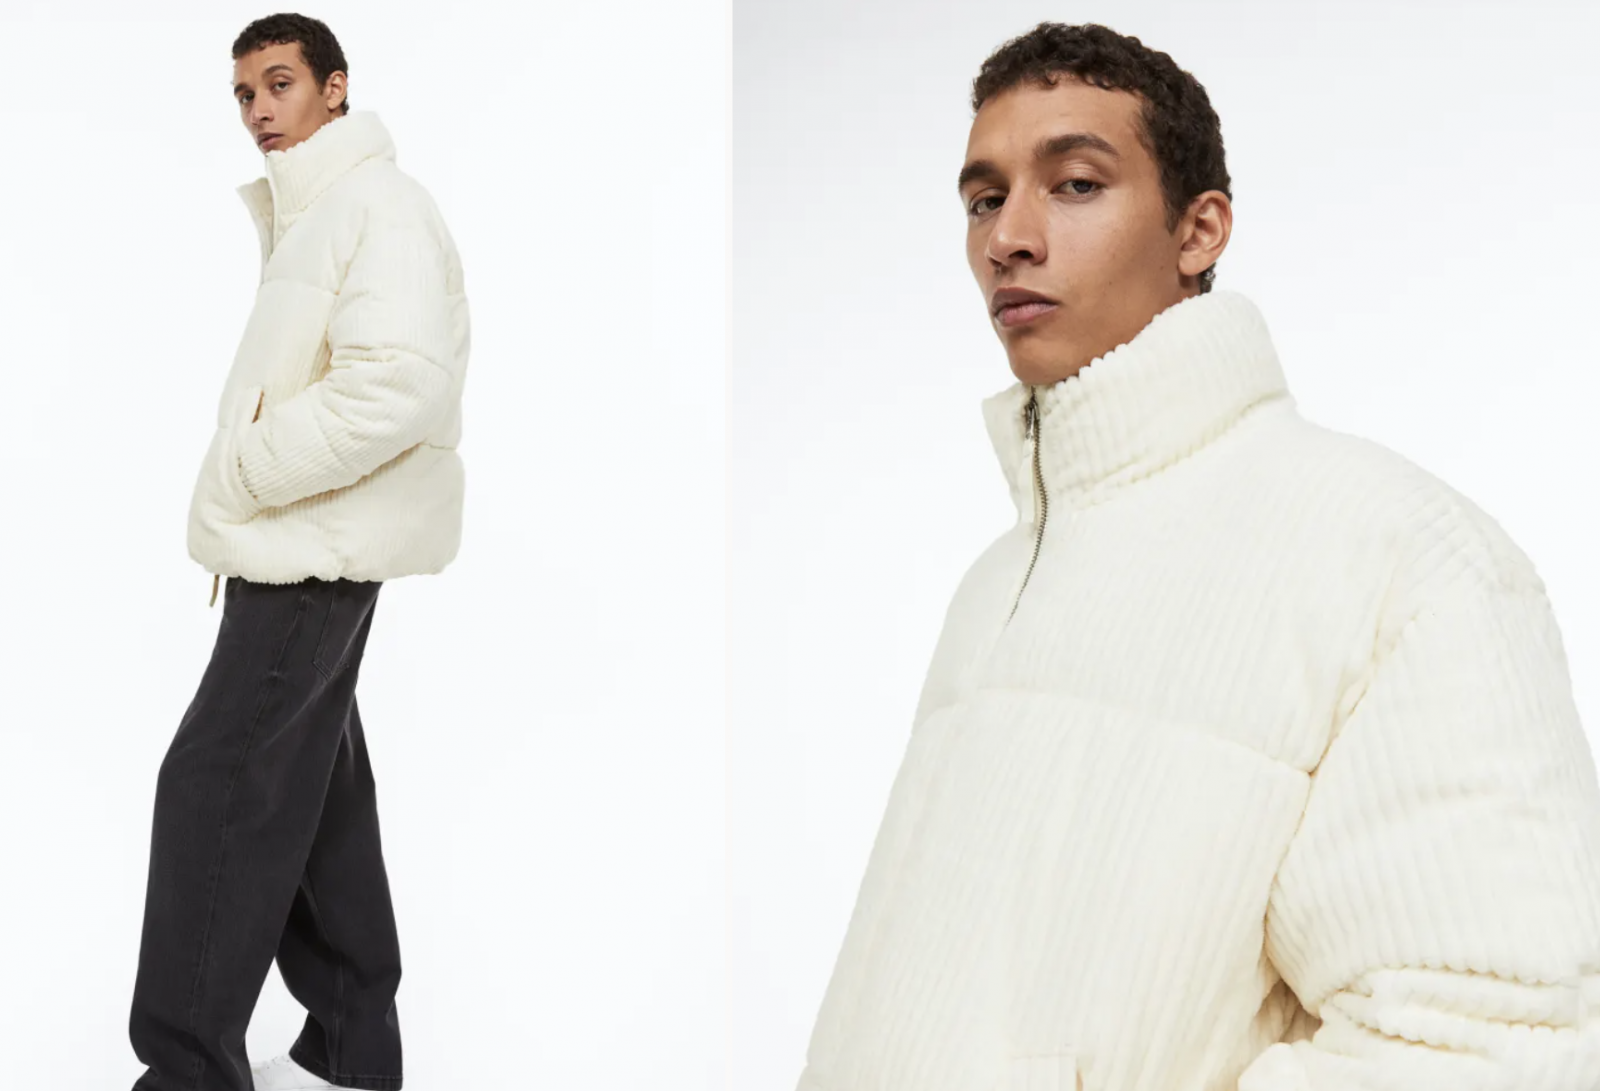 Shop H&M's after-Christmas sale to save on men's winter coats.